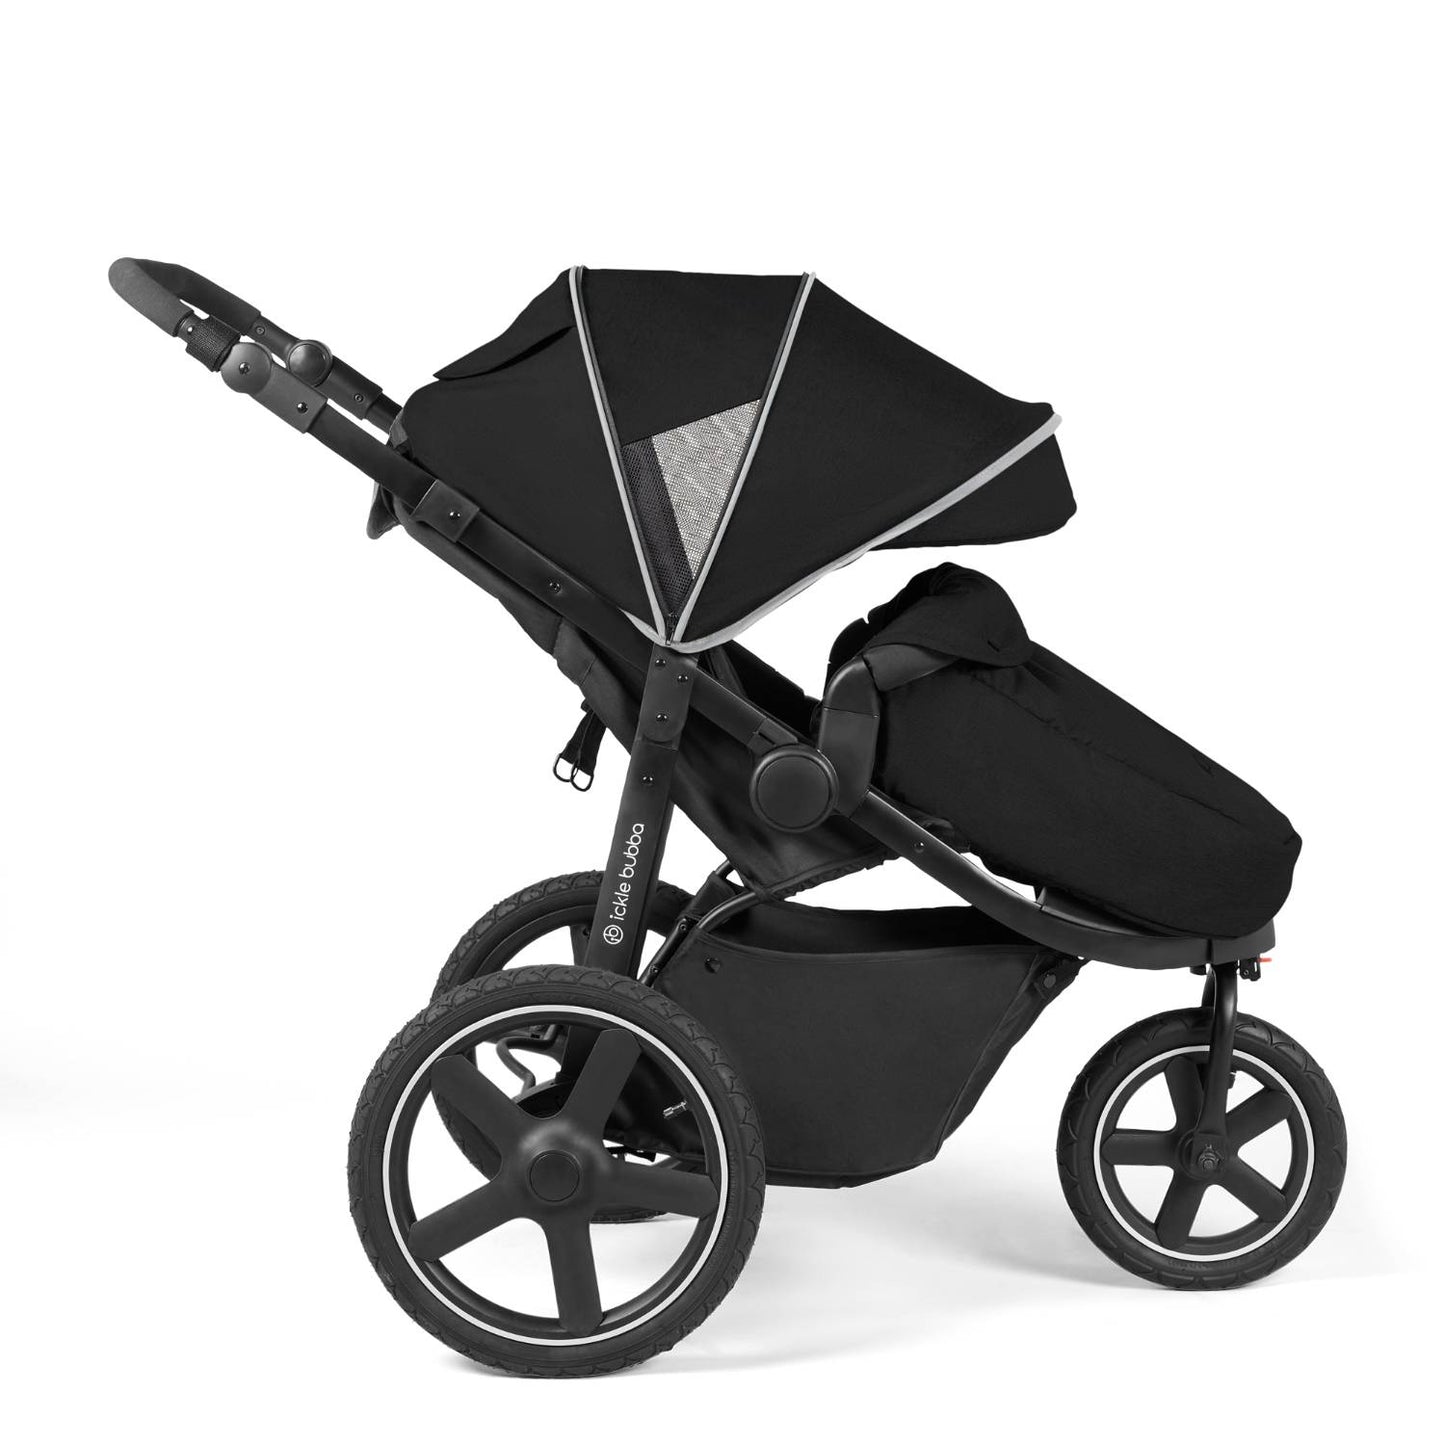 Side view of Ickle Bubba Venus Prime Jogger Stroller in Black colour with foot warmer